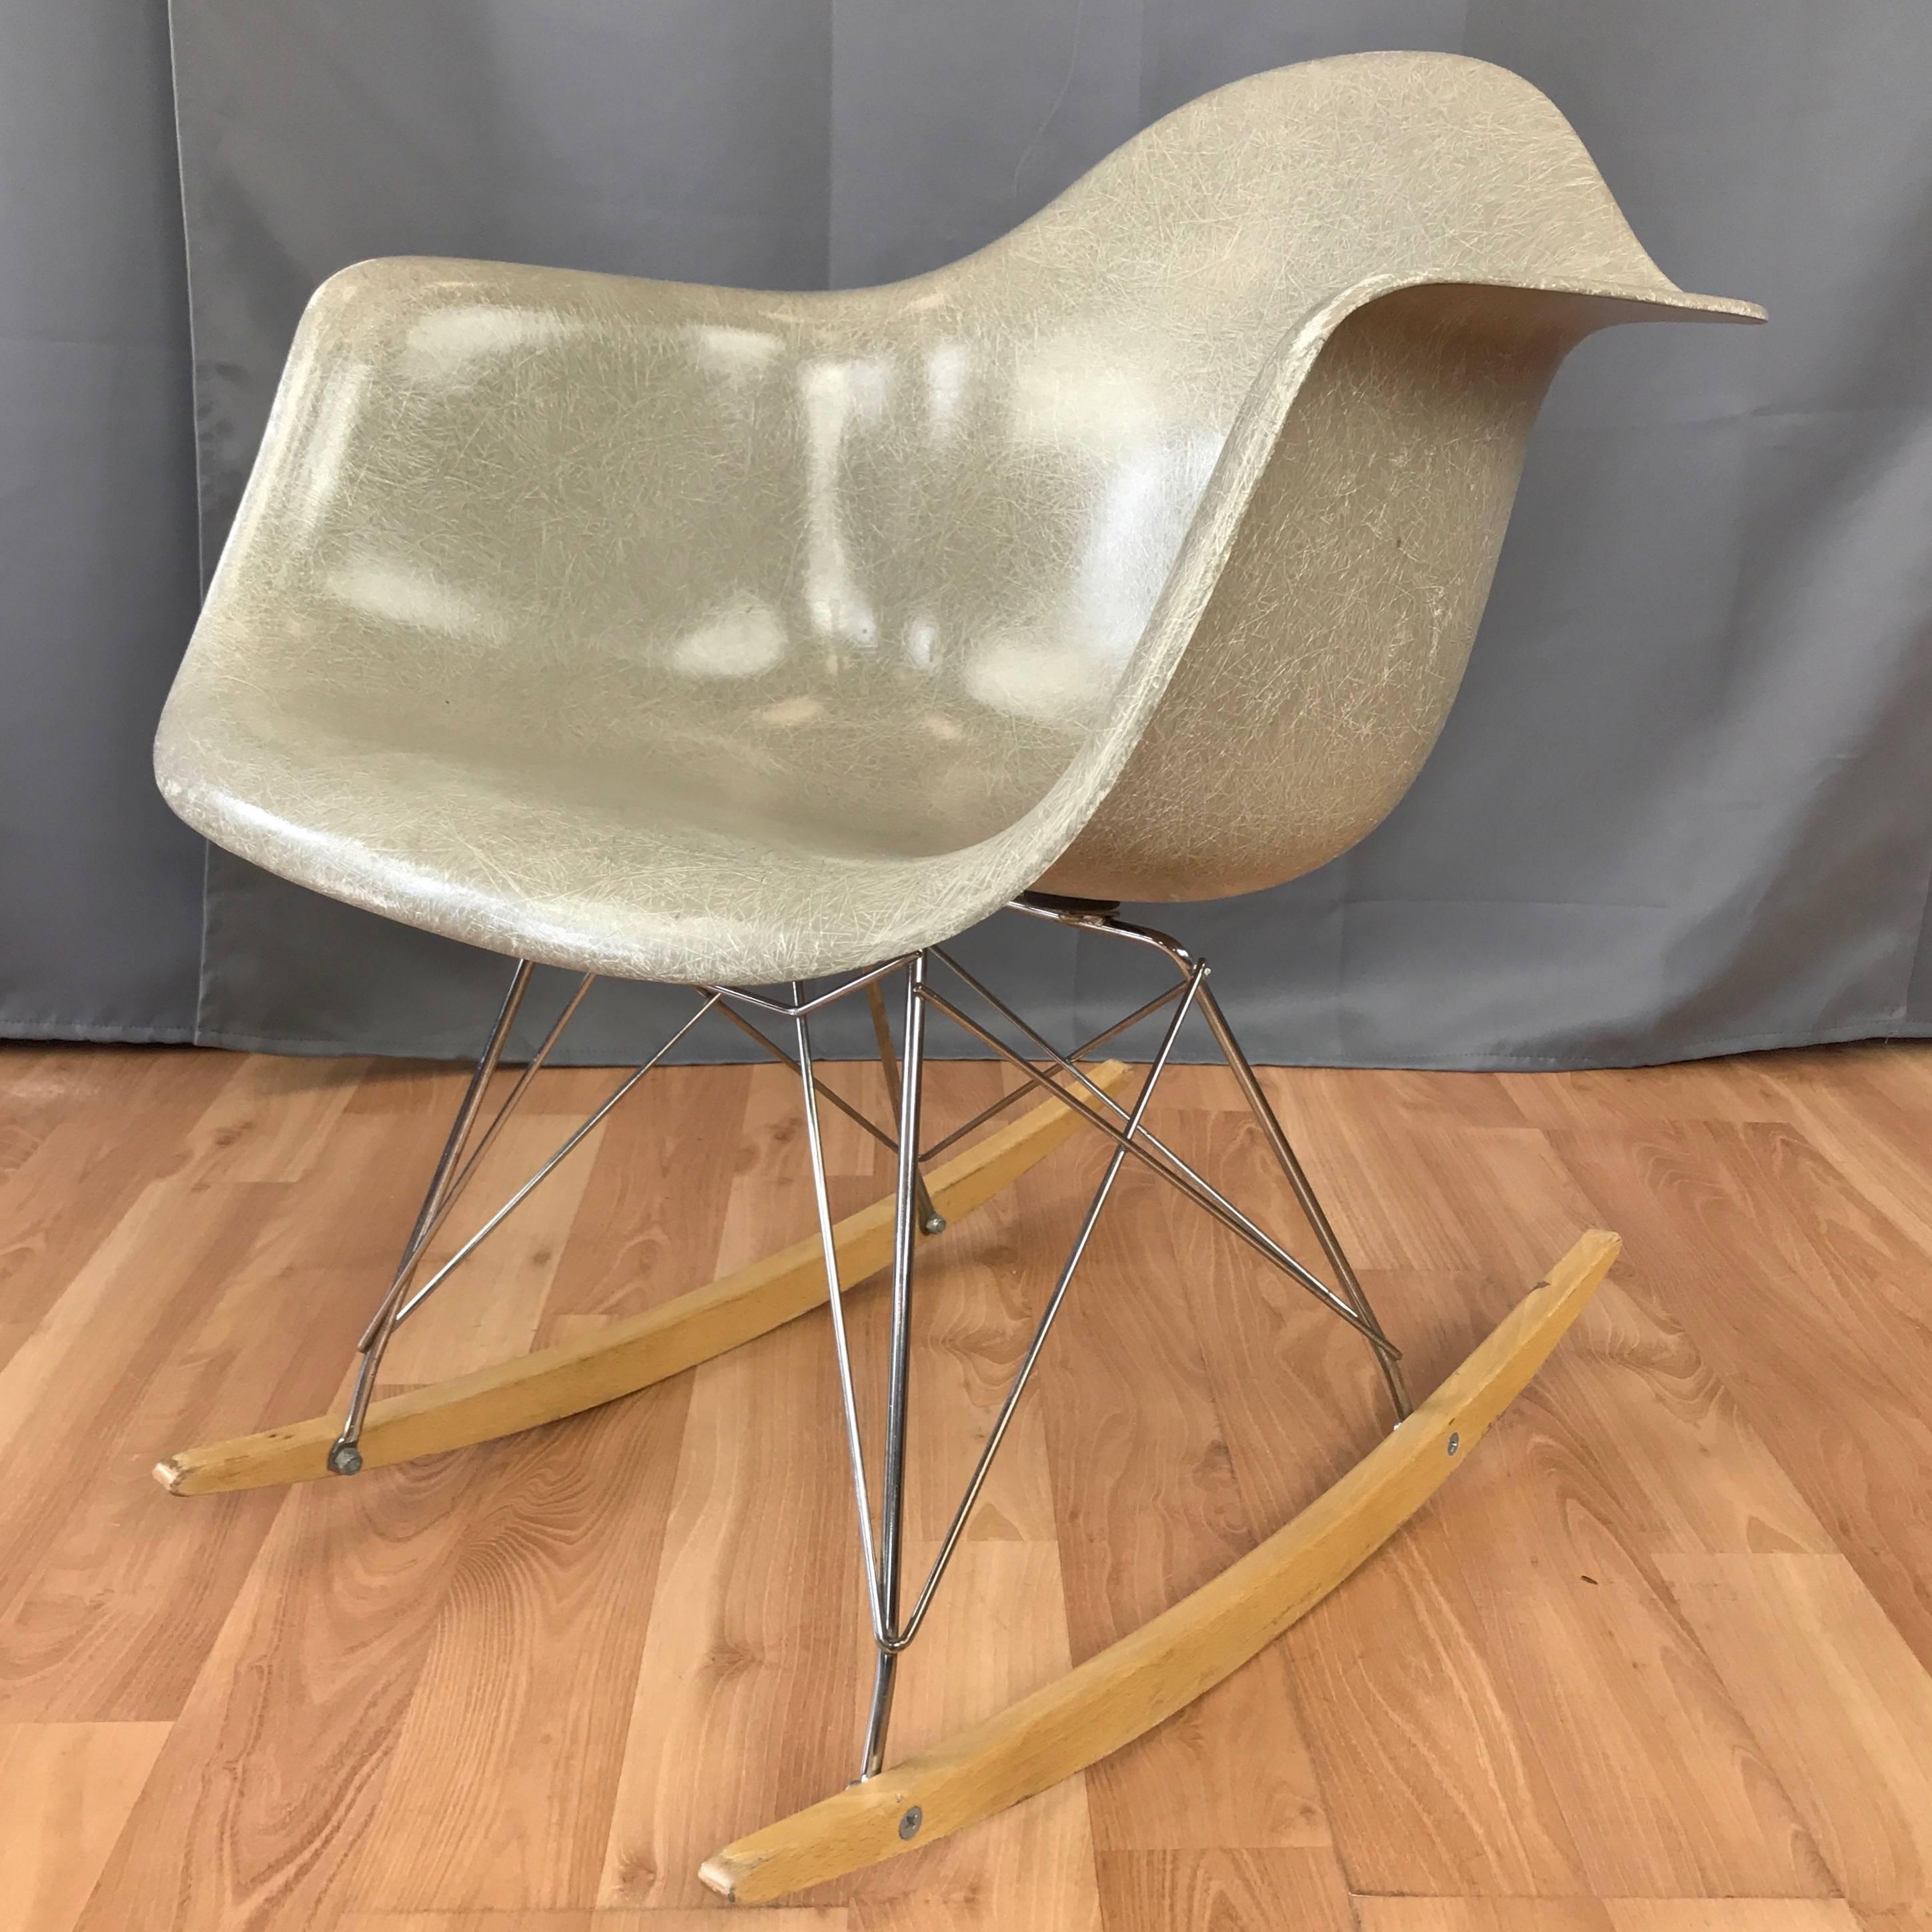 A RAR rocker by Charles and Ray Eames for Herman Miller with circa 1950s greige seat and vintage reproduction base.

Molded fiberglass shell seat in greige—one of only three colors originally offered—that’s developed a warm, light grey tone over